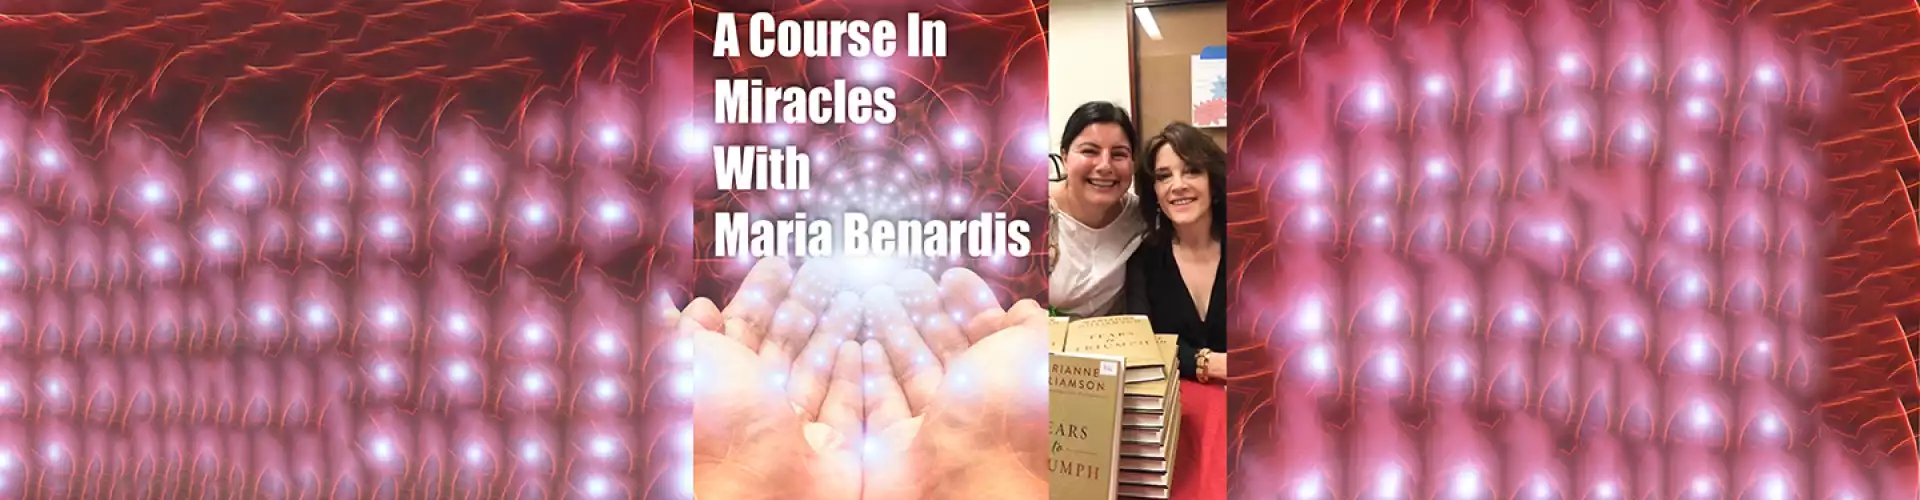 A Course in Miracles